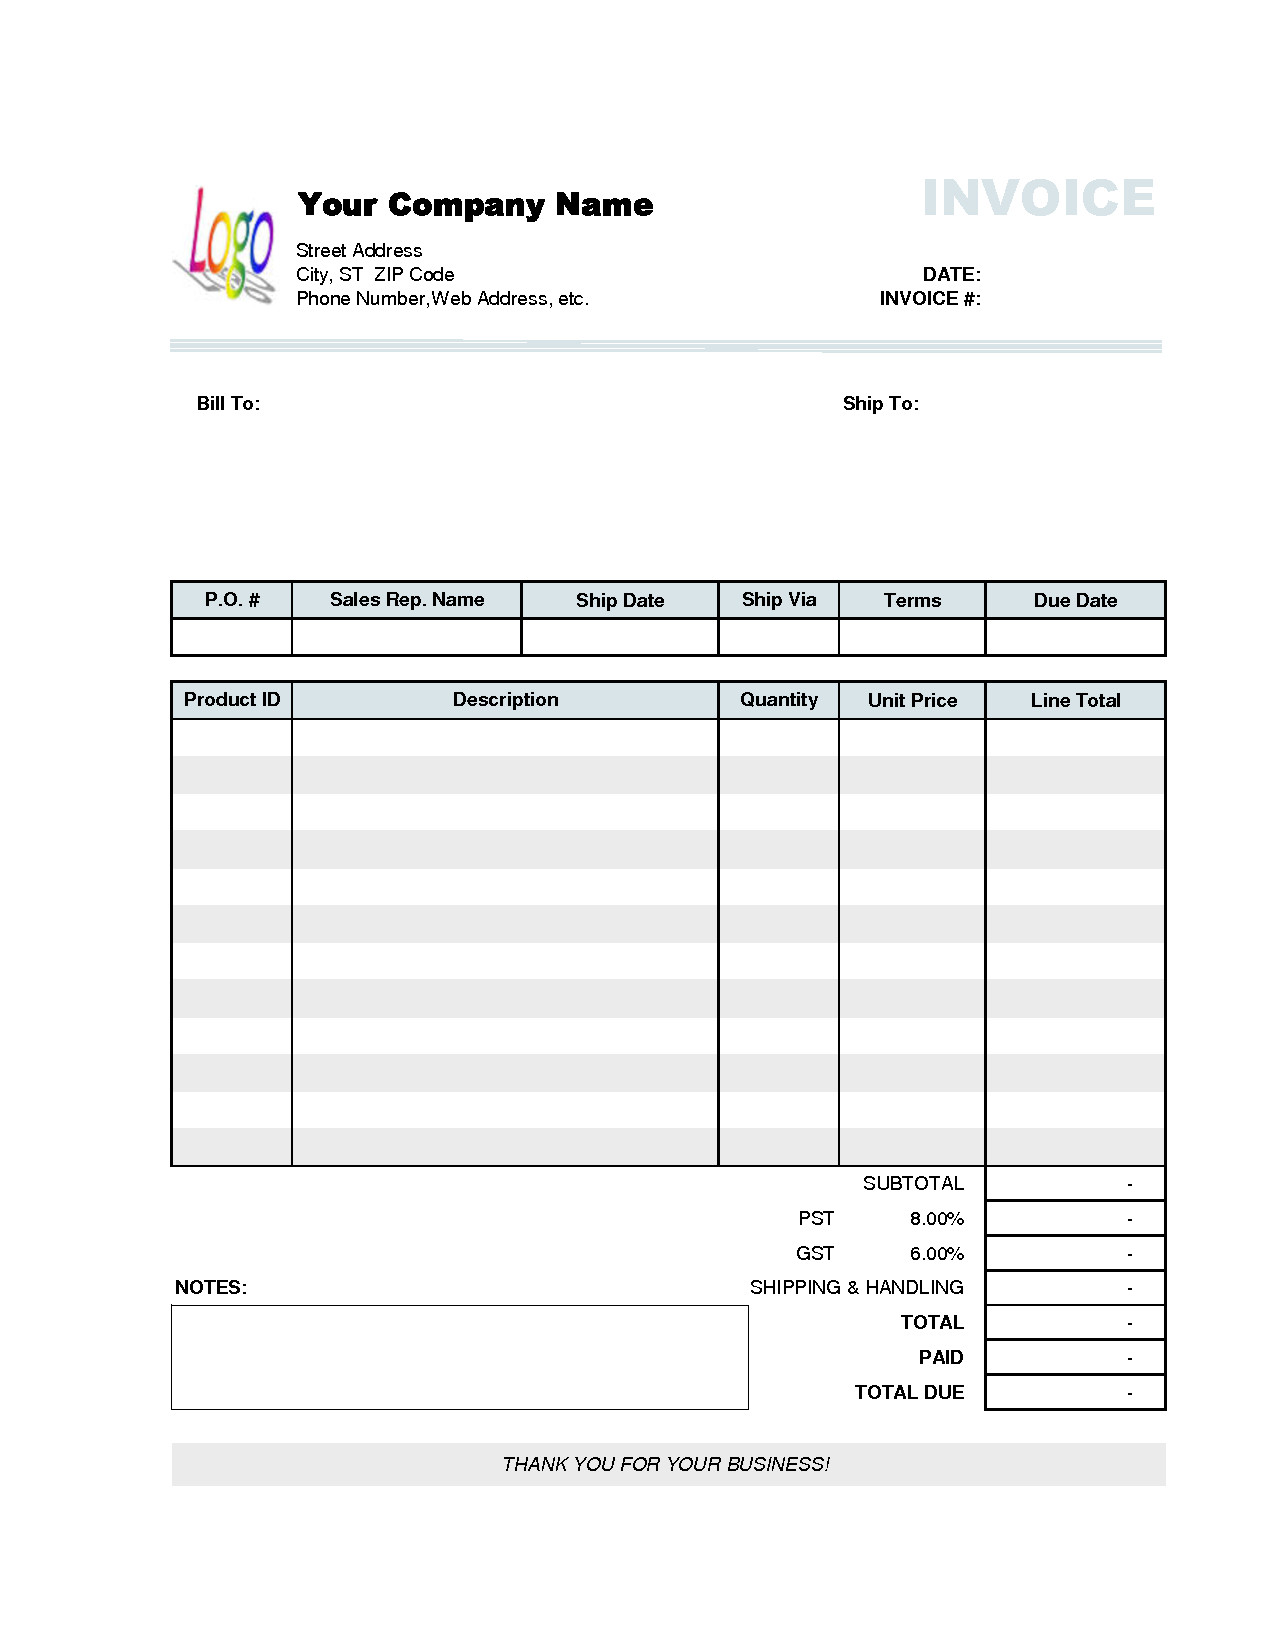 Invoice Template for Excel Invoice Template Excel 2010